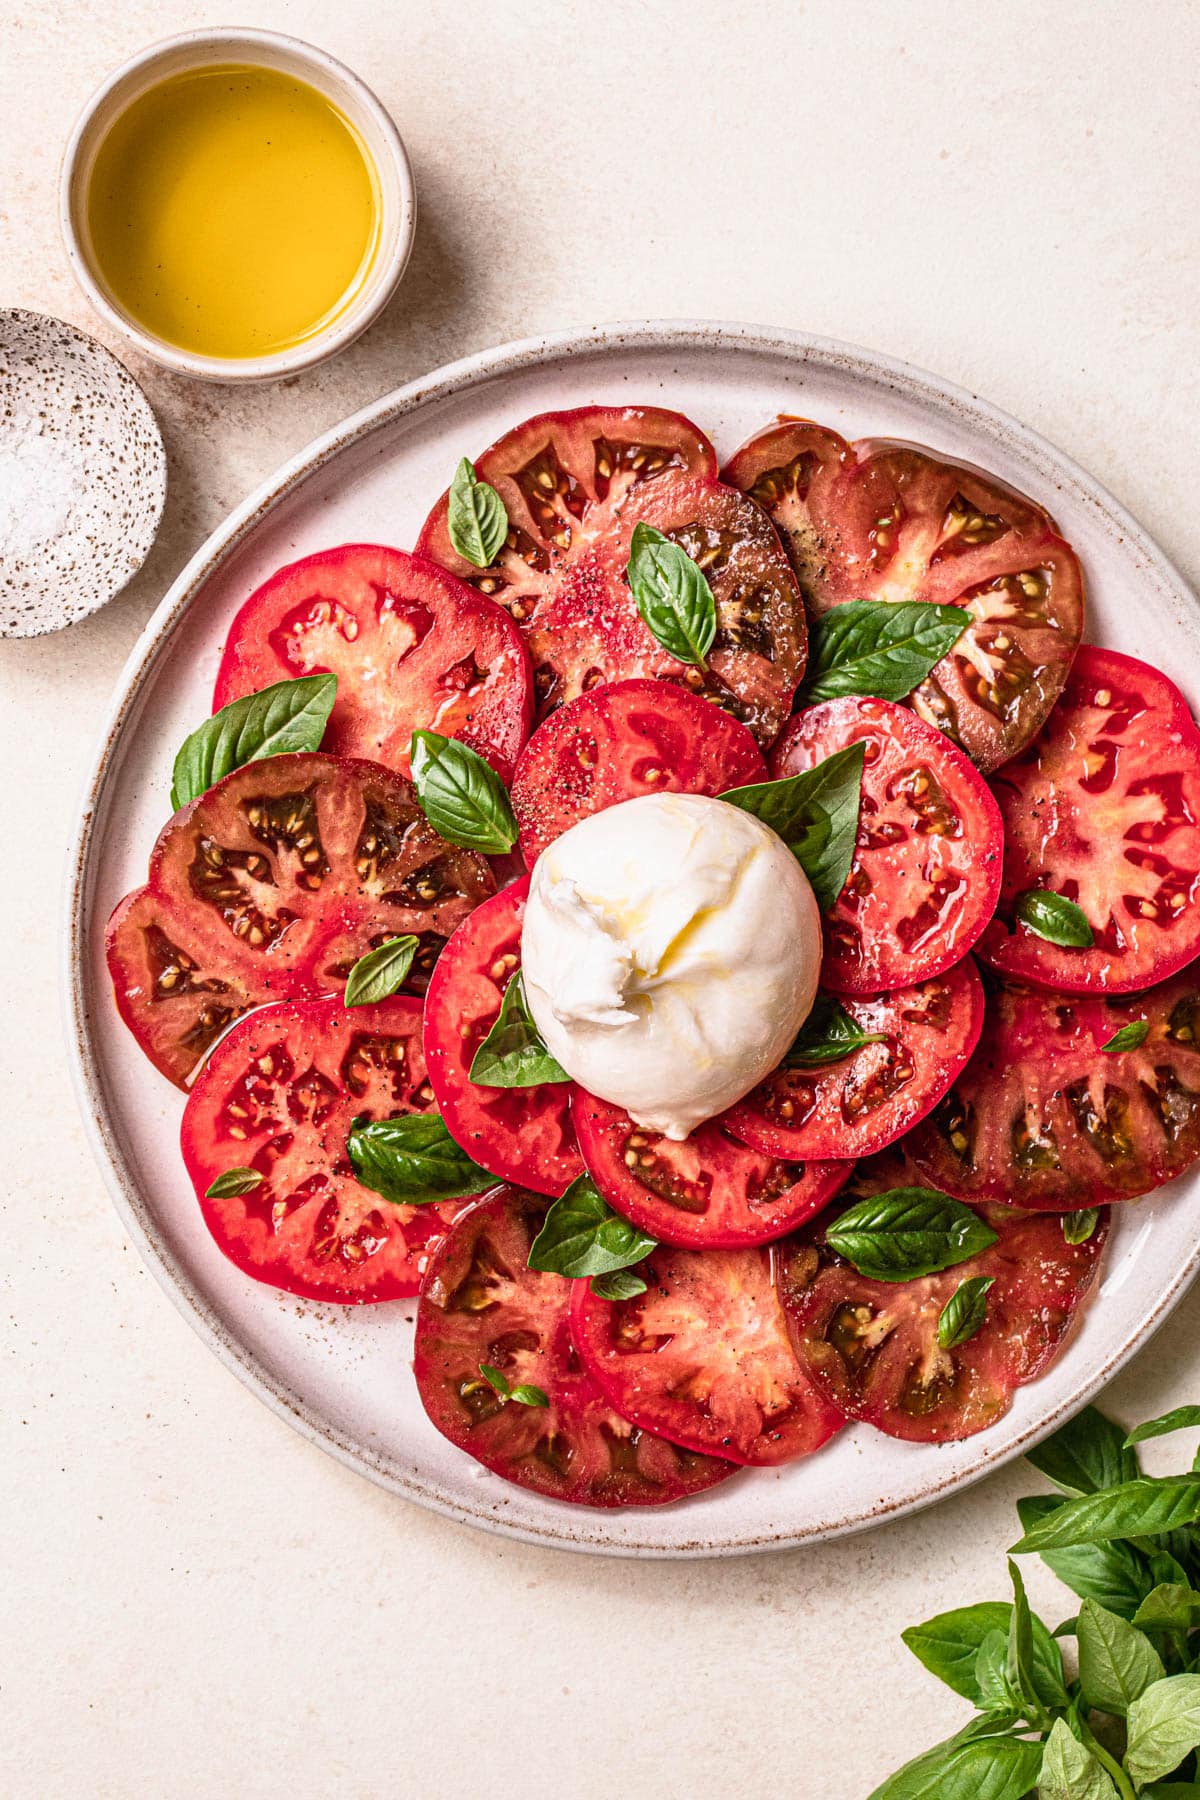 Burrata caprese salad made with heirloom tomatoes, served on a white ceramic plate.